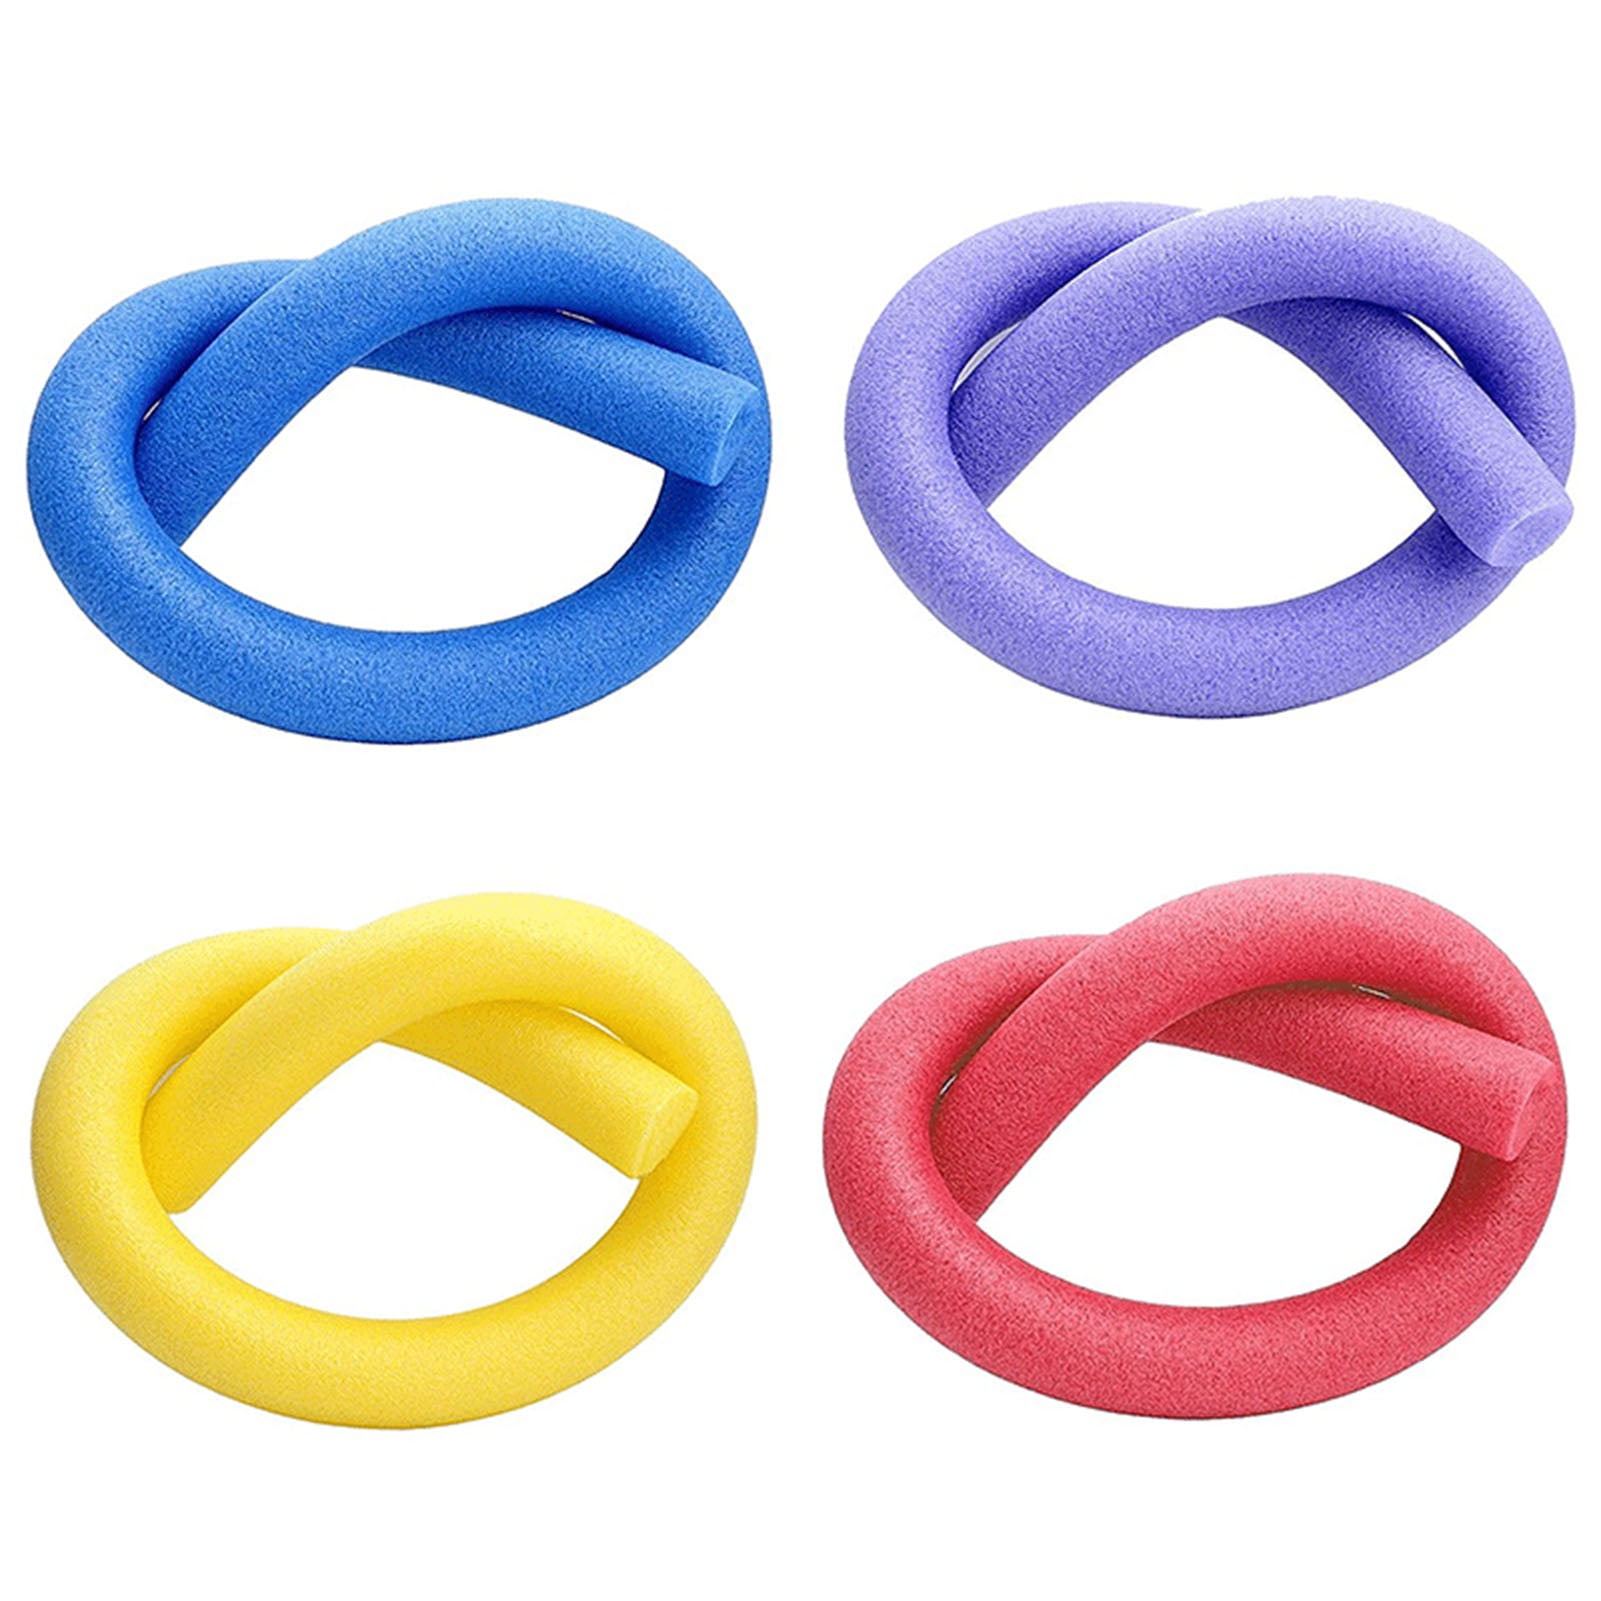 6cm Swimming Pool Noodle Solid Inside Water Noodle Kids Adults Exercise Float